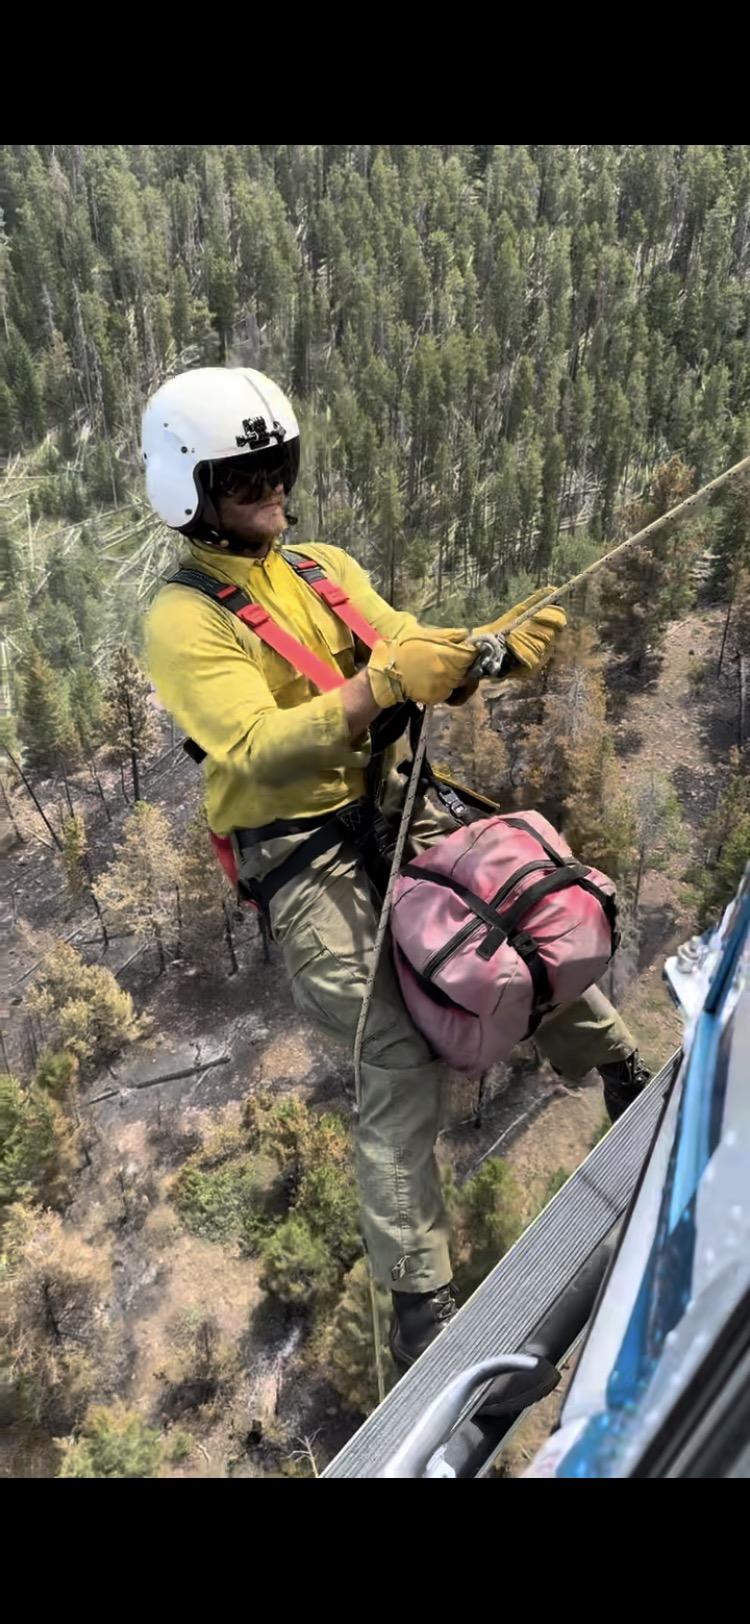 Lucky Peak rappelers from the Boise National Forest on the Speirs Fire.